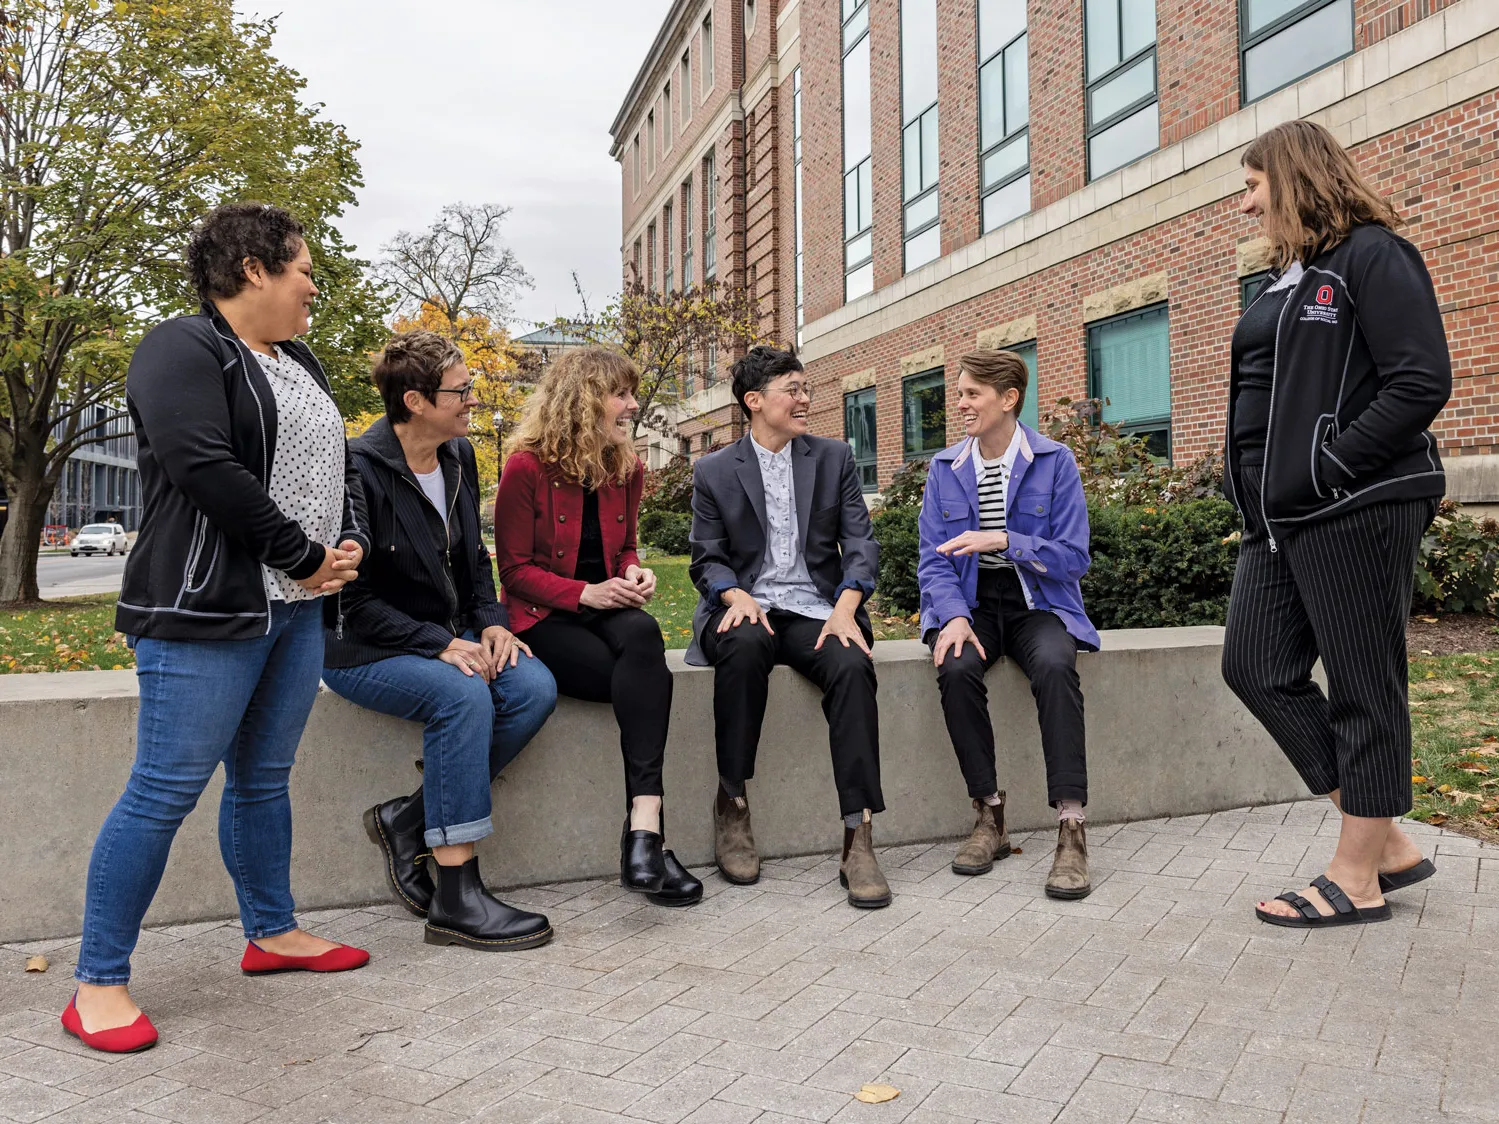 Outside of the brick Stillman Hall, a group gathers on a small paved plaza. Some sit on a low wall and some stand as they happily chat on what seems to be a chilly fall day, judging by their jackets and leaf colors on trees in the background. The people are a mix of ages and genders. 